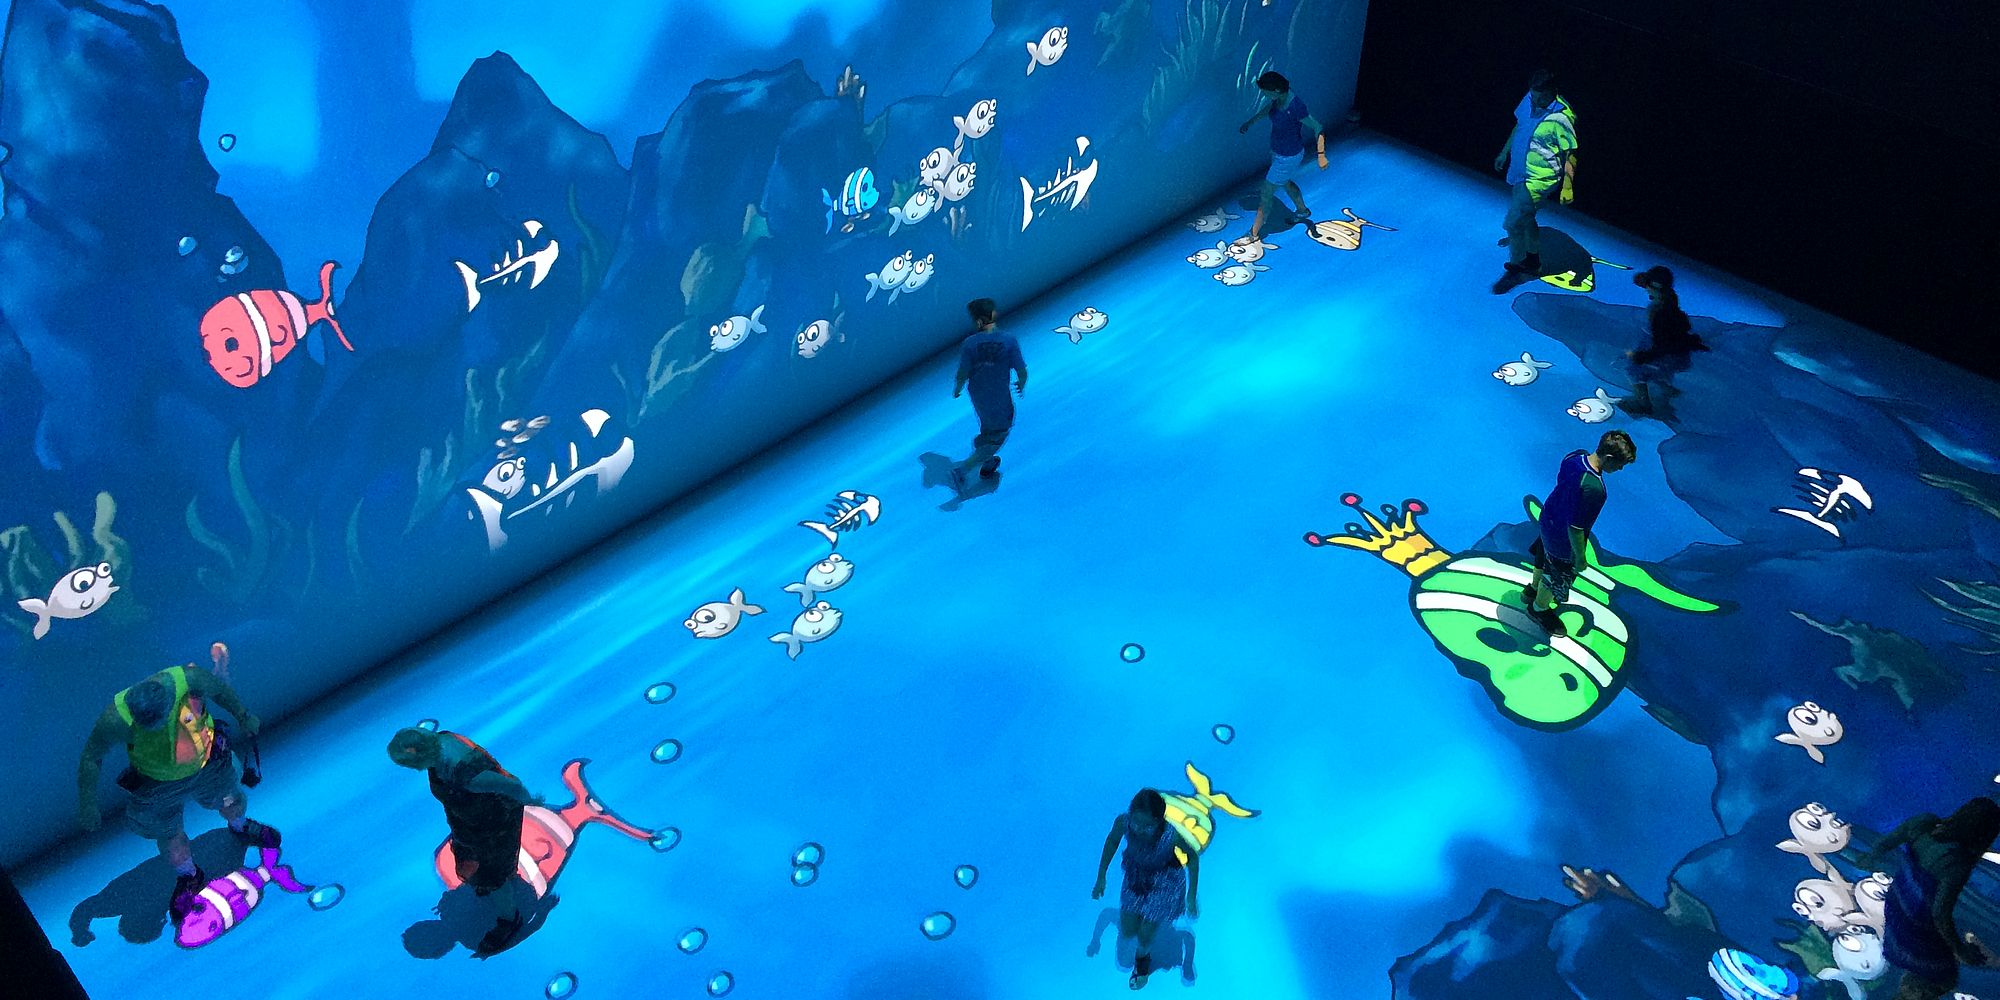 Ars Electronica Game Changer Suite: Fish Feast / FH Hagenberg